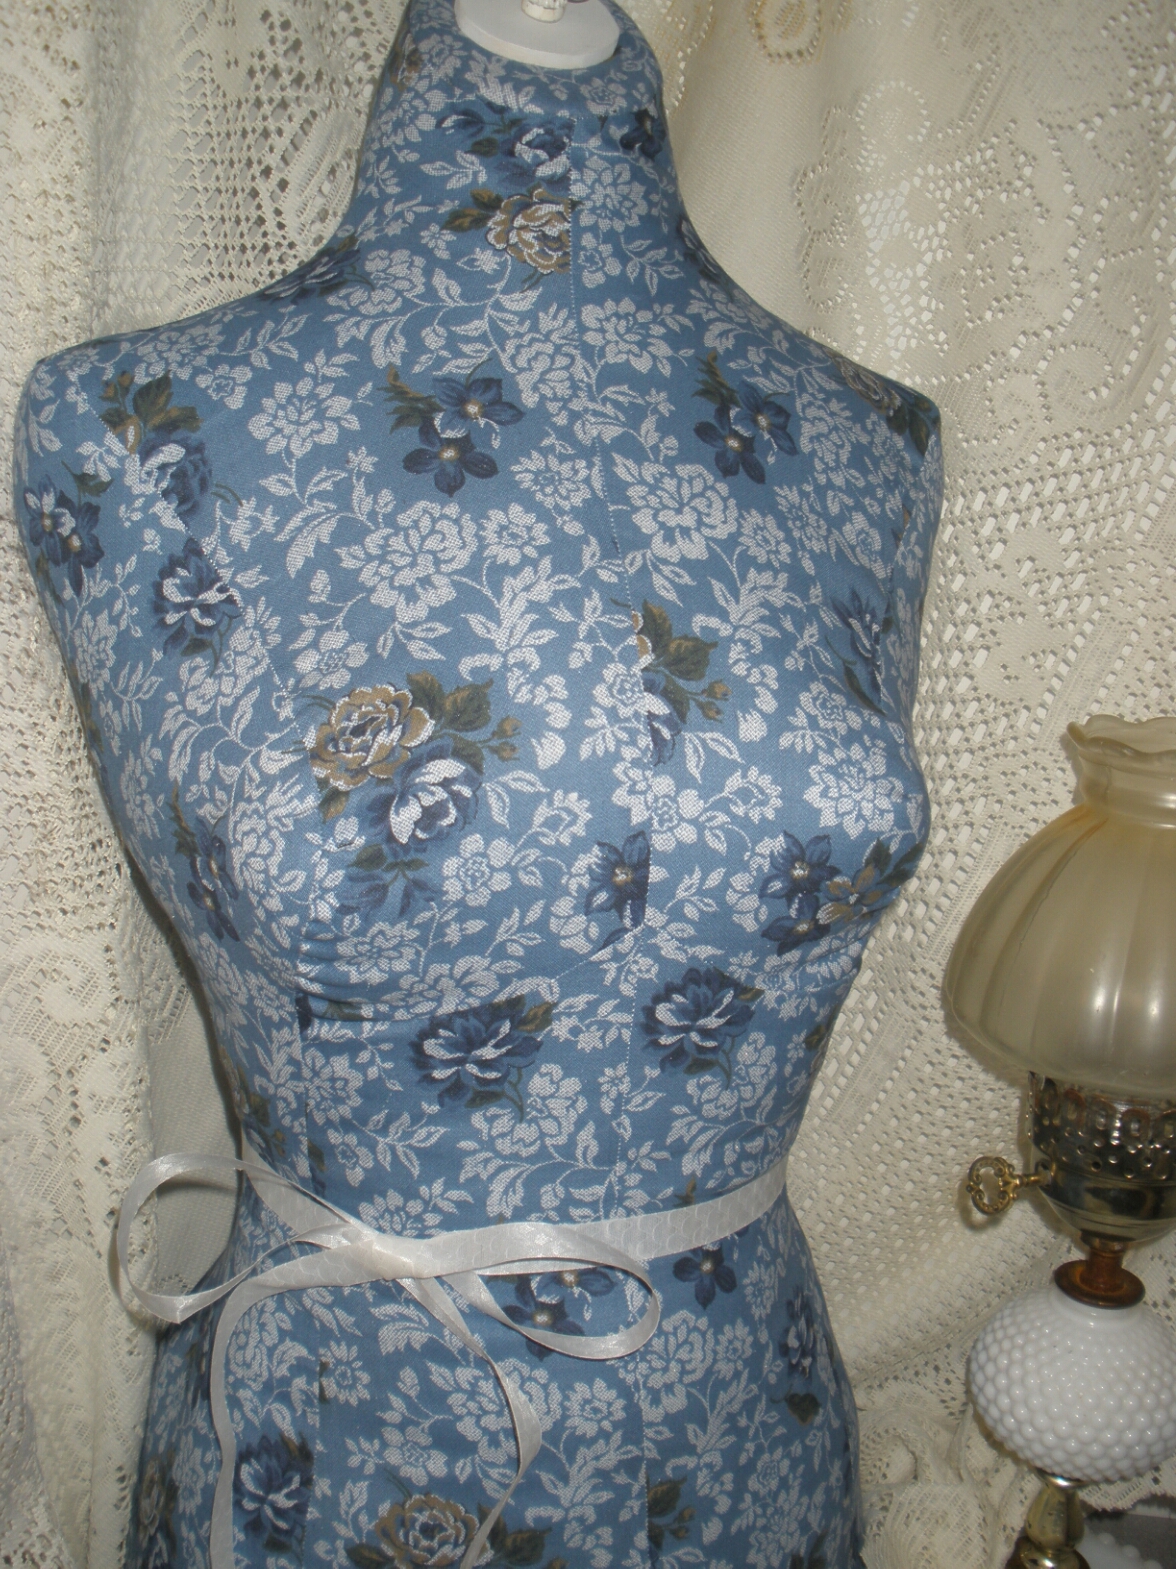 Boutique Dress Form Designs With Stand. Life Size Torso Great For Store Front Or Home Decor. Blue China Floral Print.